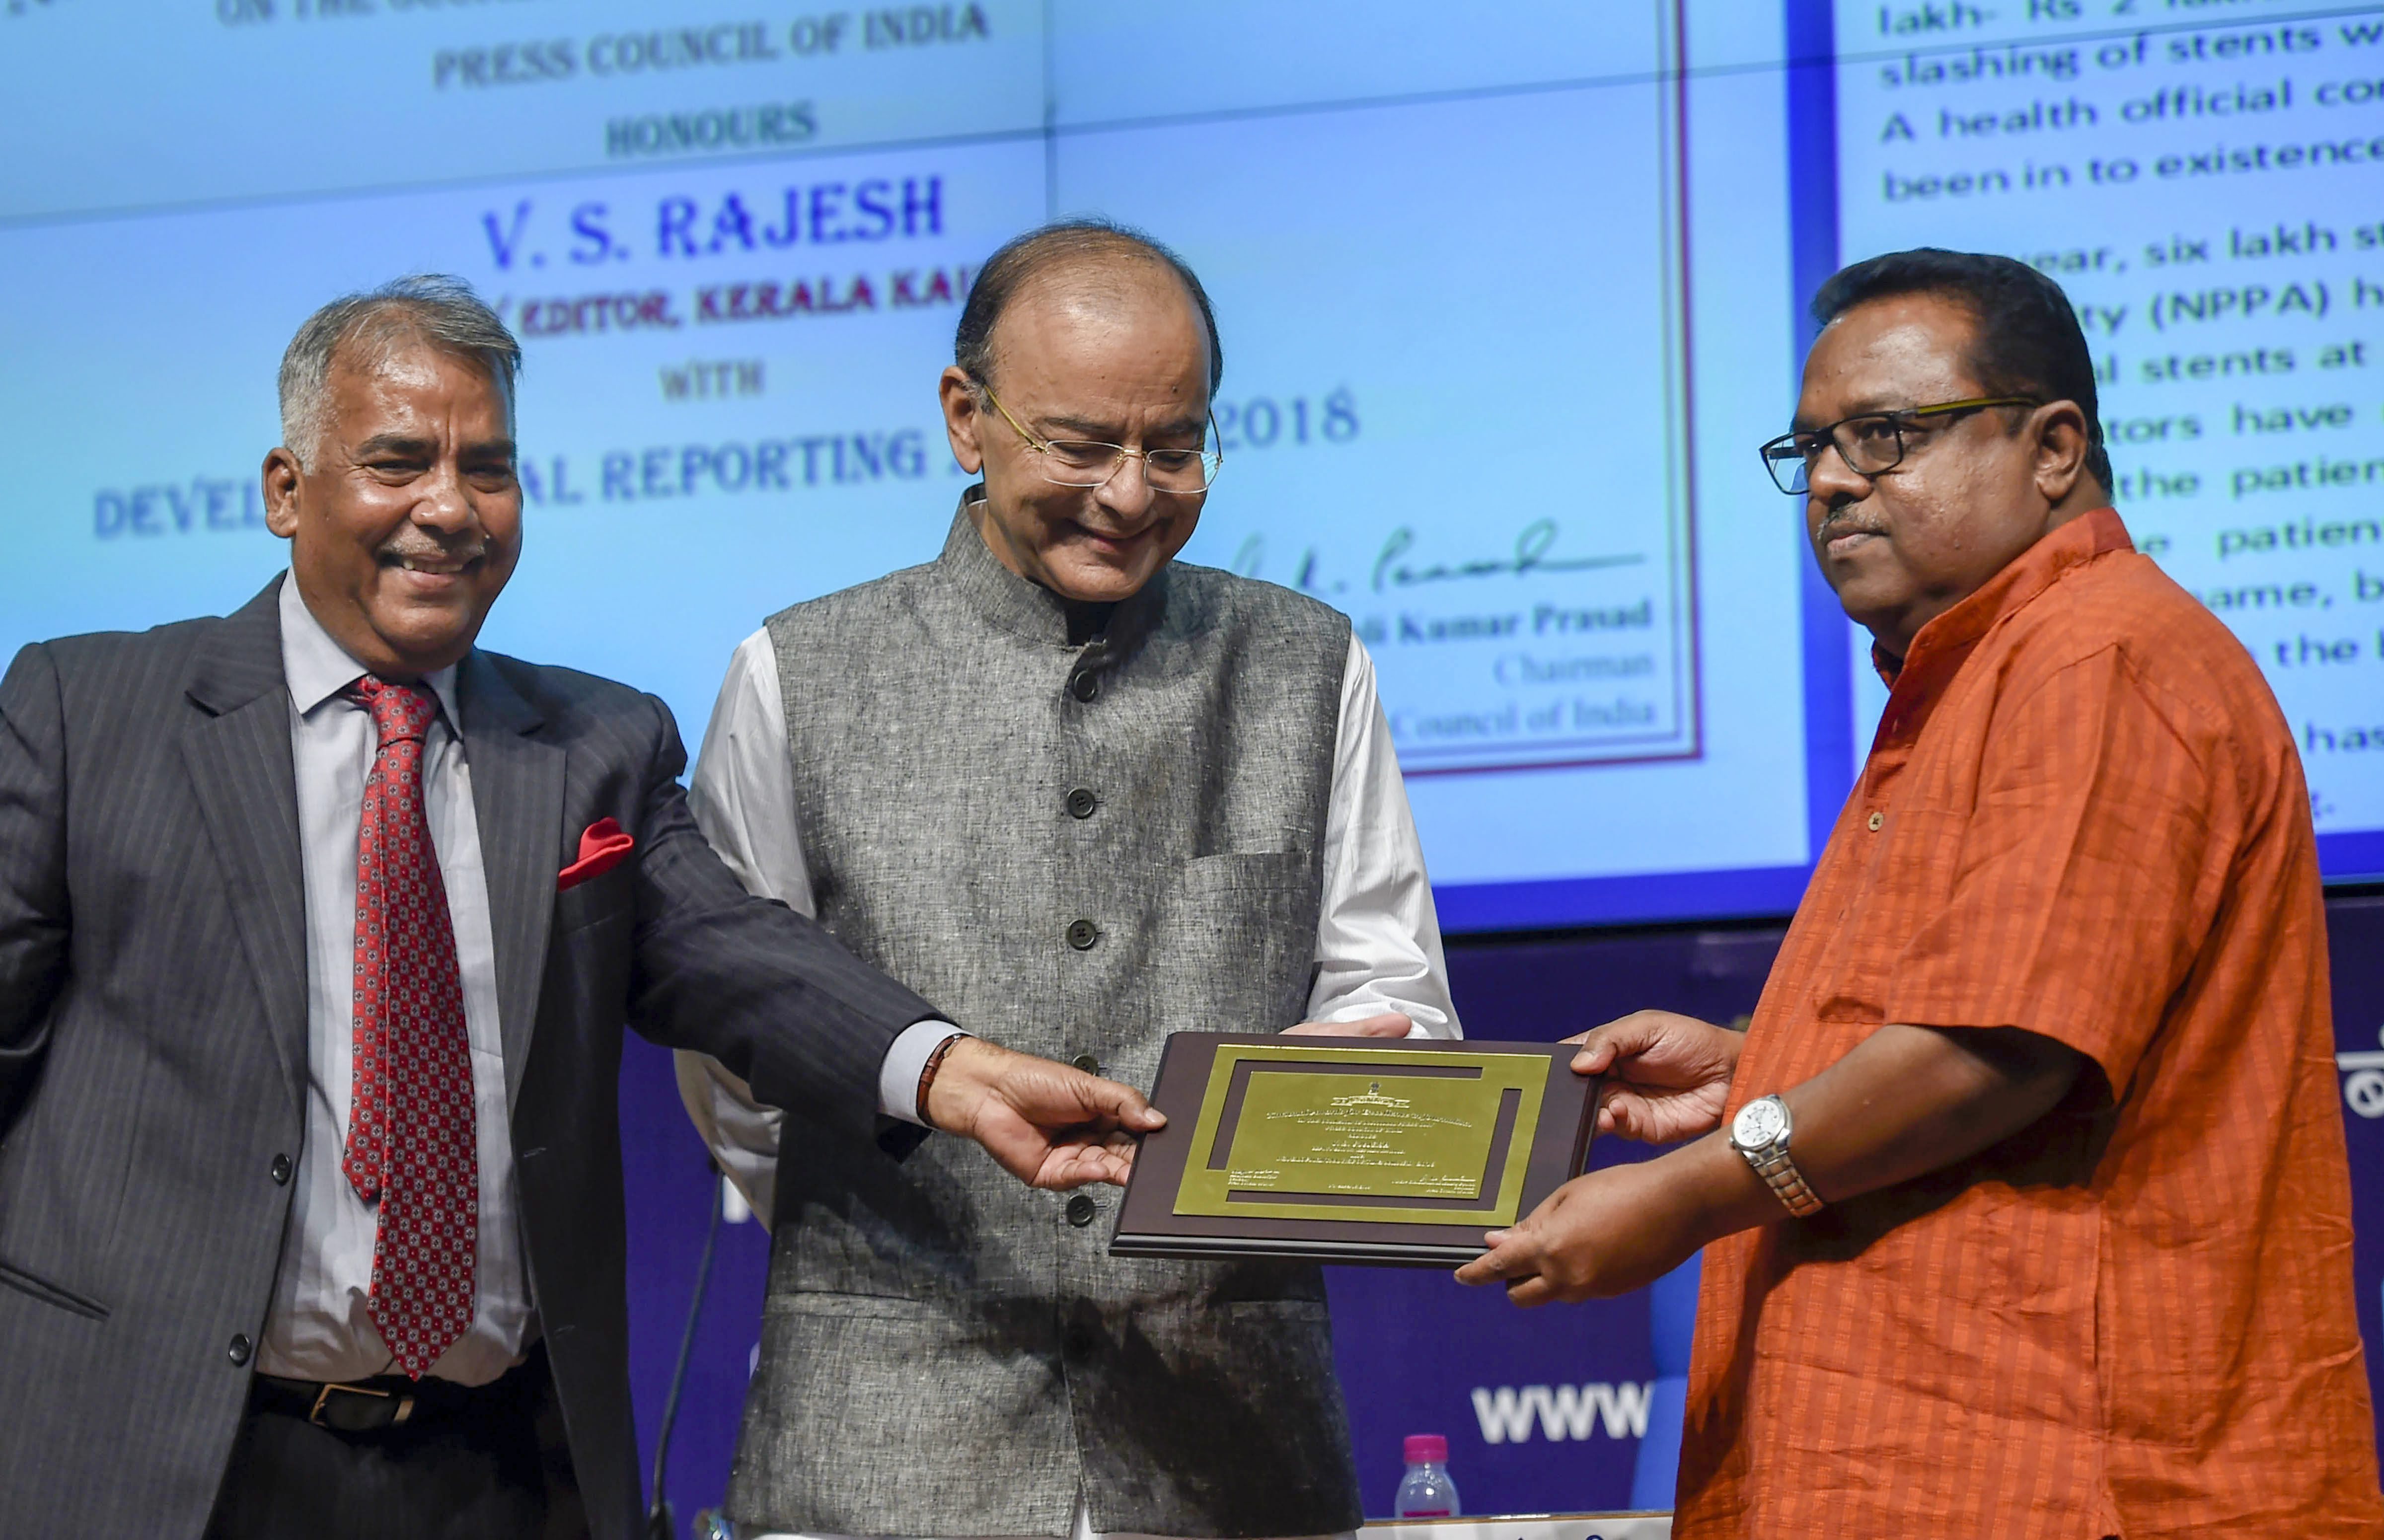 Finance Minister Arun Jaitley and Chairman Press Council of India, Justice Chandramauli Kumar Prasad, present the 'Development Reporting Award' to Deputy Editor Kerala Kaumudi, V S Rajesh, during the National Press Day celebrations and Conferring of National Awards for Excellence in Journalism-2018, in New Delhi - PTI